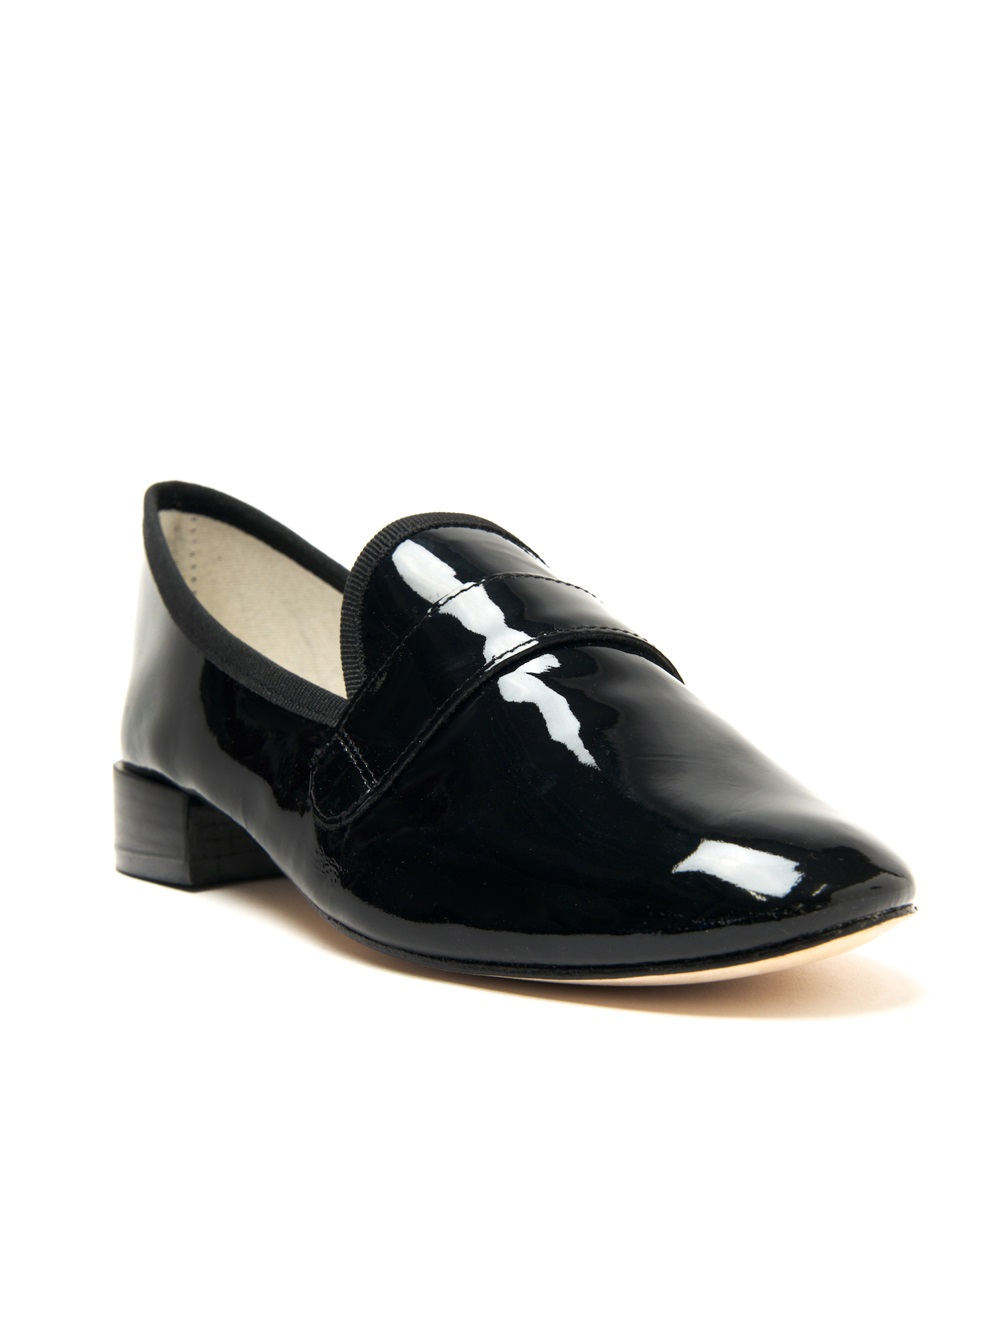 Lyst - Repetto Stacked Heel Loafer in Black